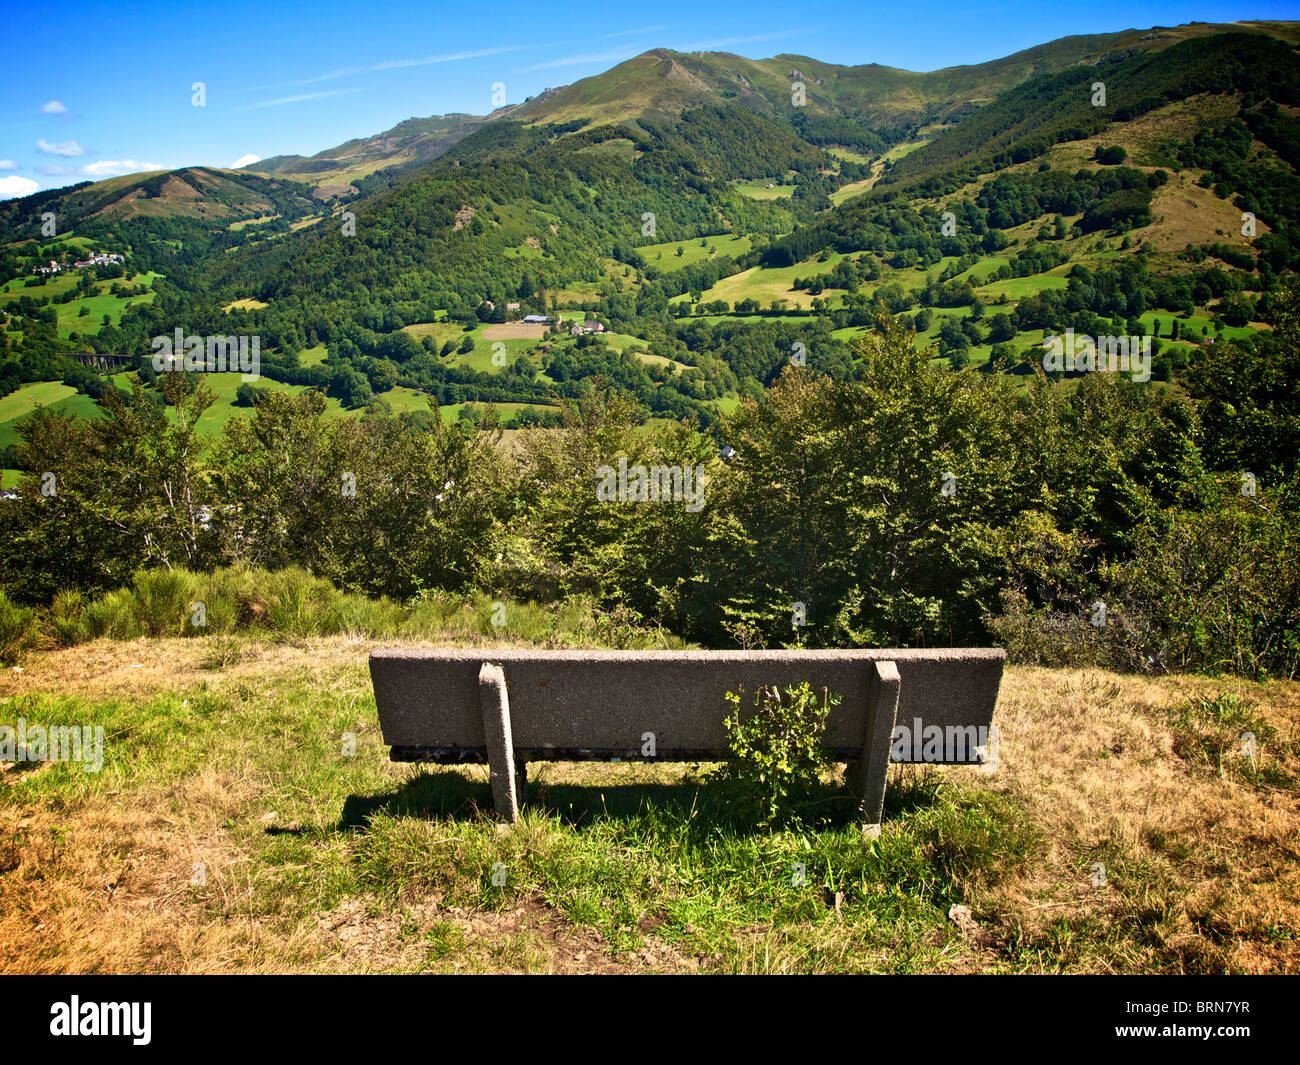 Bench overlooking the mountains of Cantal, Auvergne region, France. Stock Photo